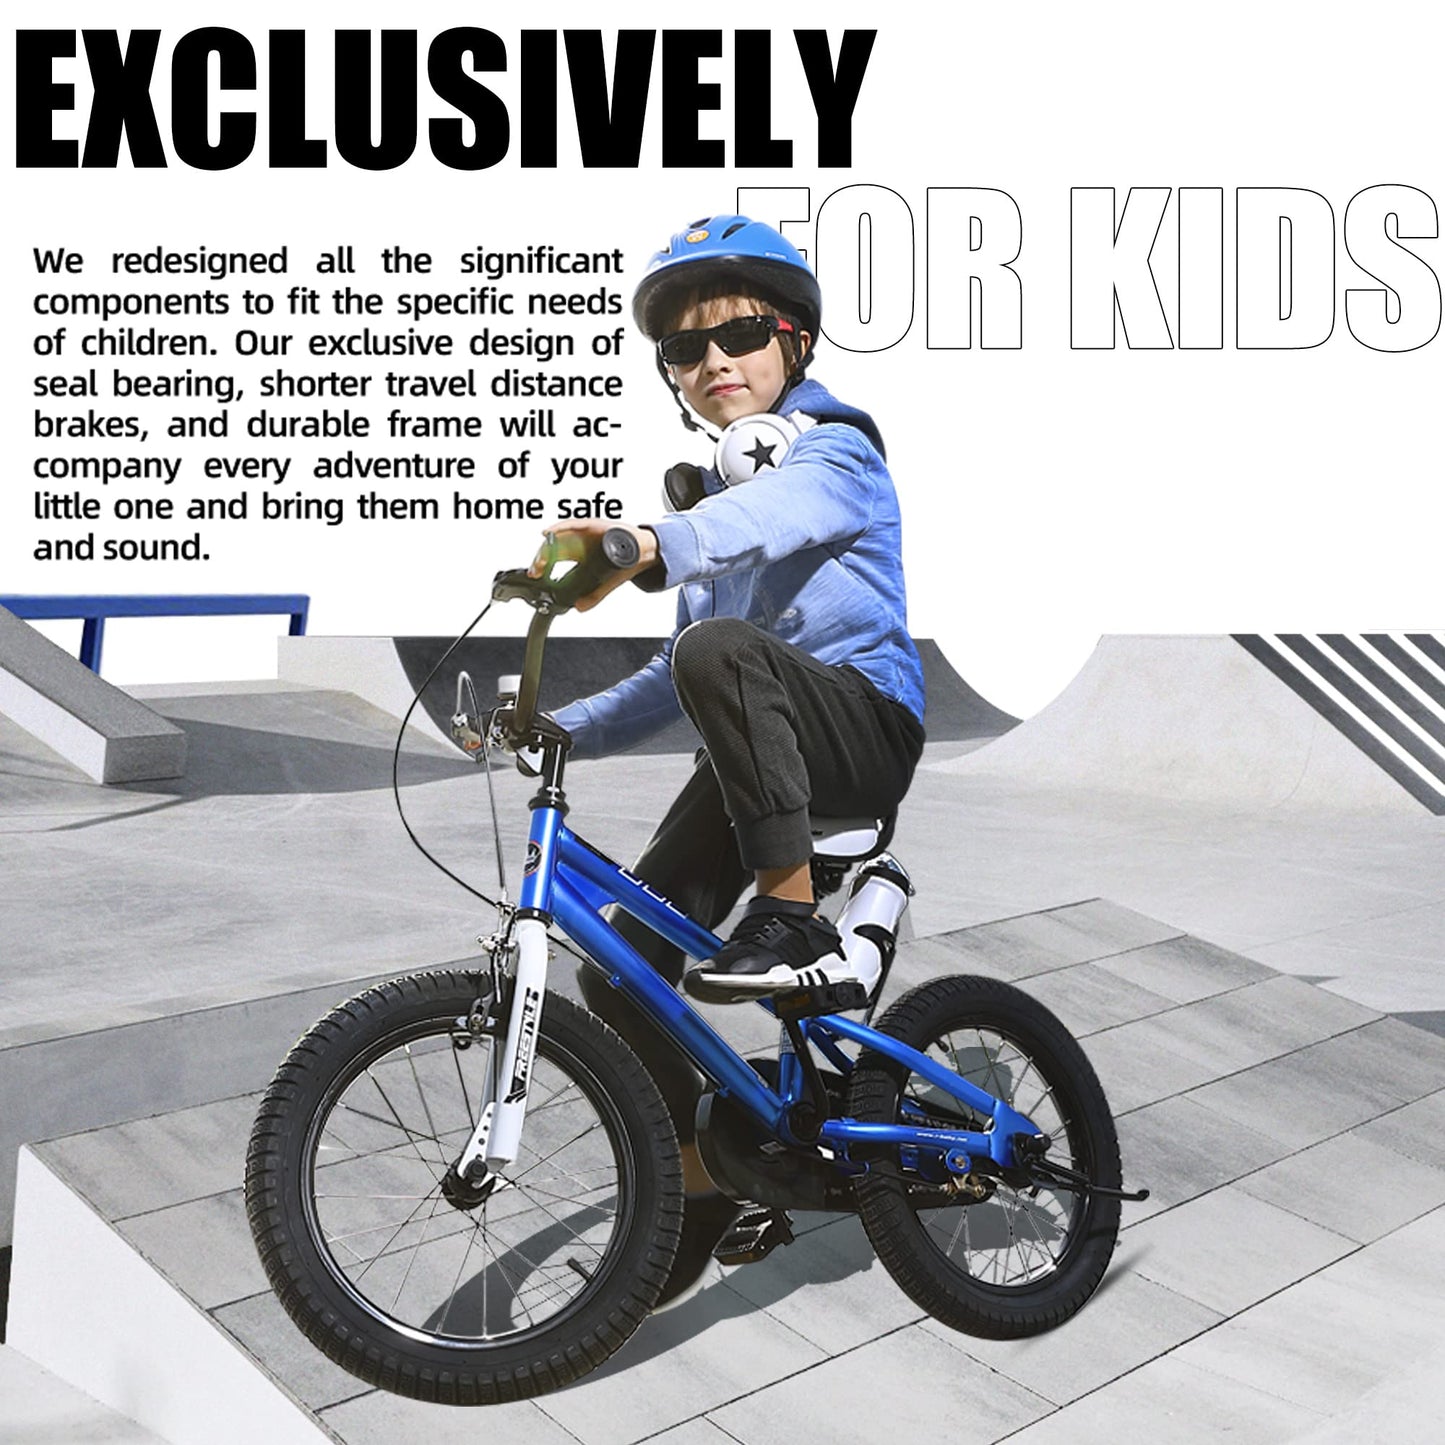 RoyalBaby BMX Freestyle Kid's Bike with Two Hand Brakes, Tool Free Pedal Assembly Boy's Bike and Girl's Bike, Training Wheels for 12" 14" 16", Kickstand for 16" 18" Bicycle, Blue Color (18 Inch)